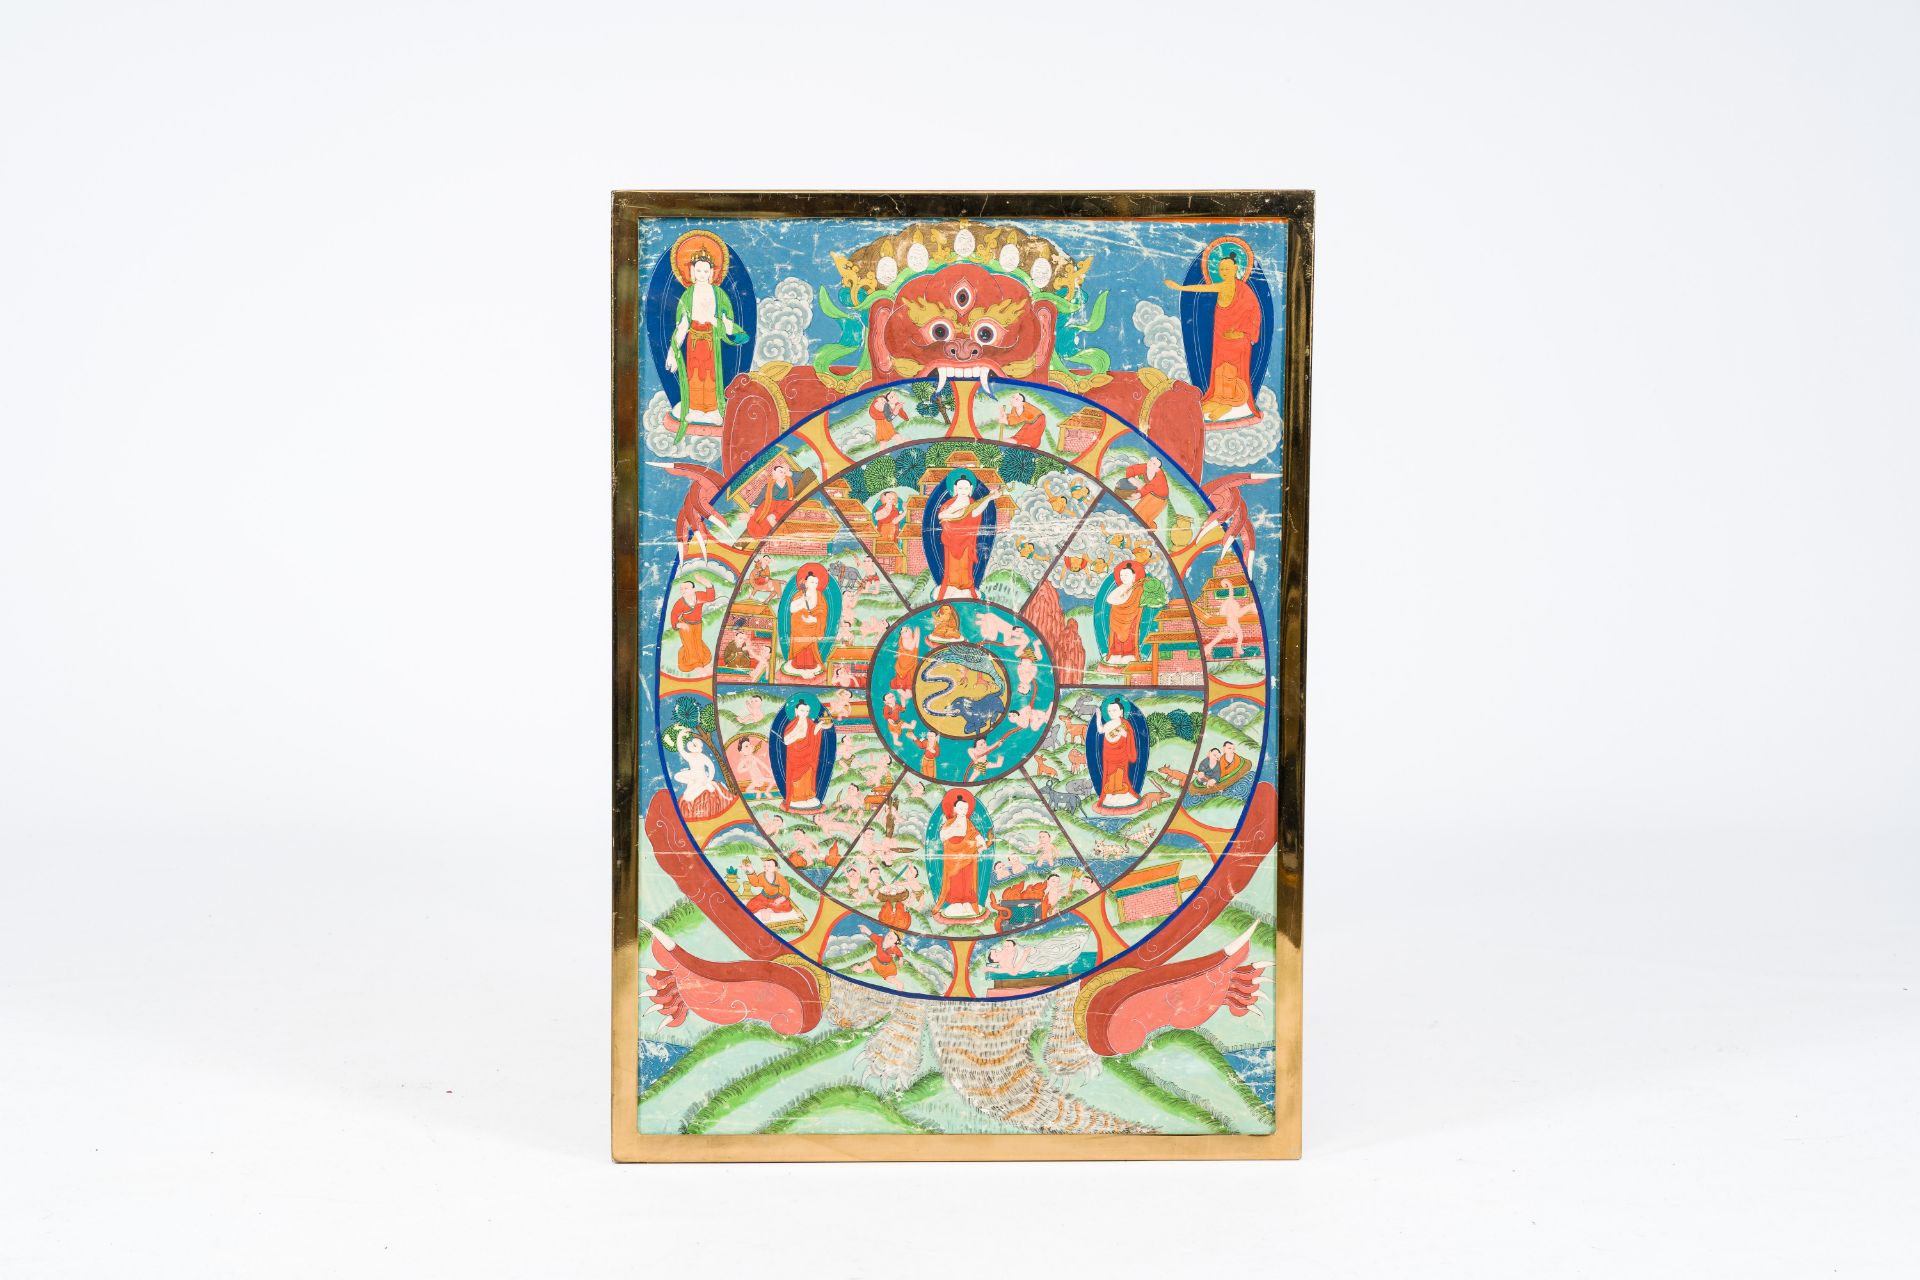 A 'Bhavacakra' or 'Wheel of life' thangka, Tibet or Nepal, 20th C. - Image 2 of 3